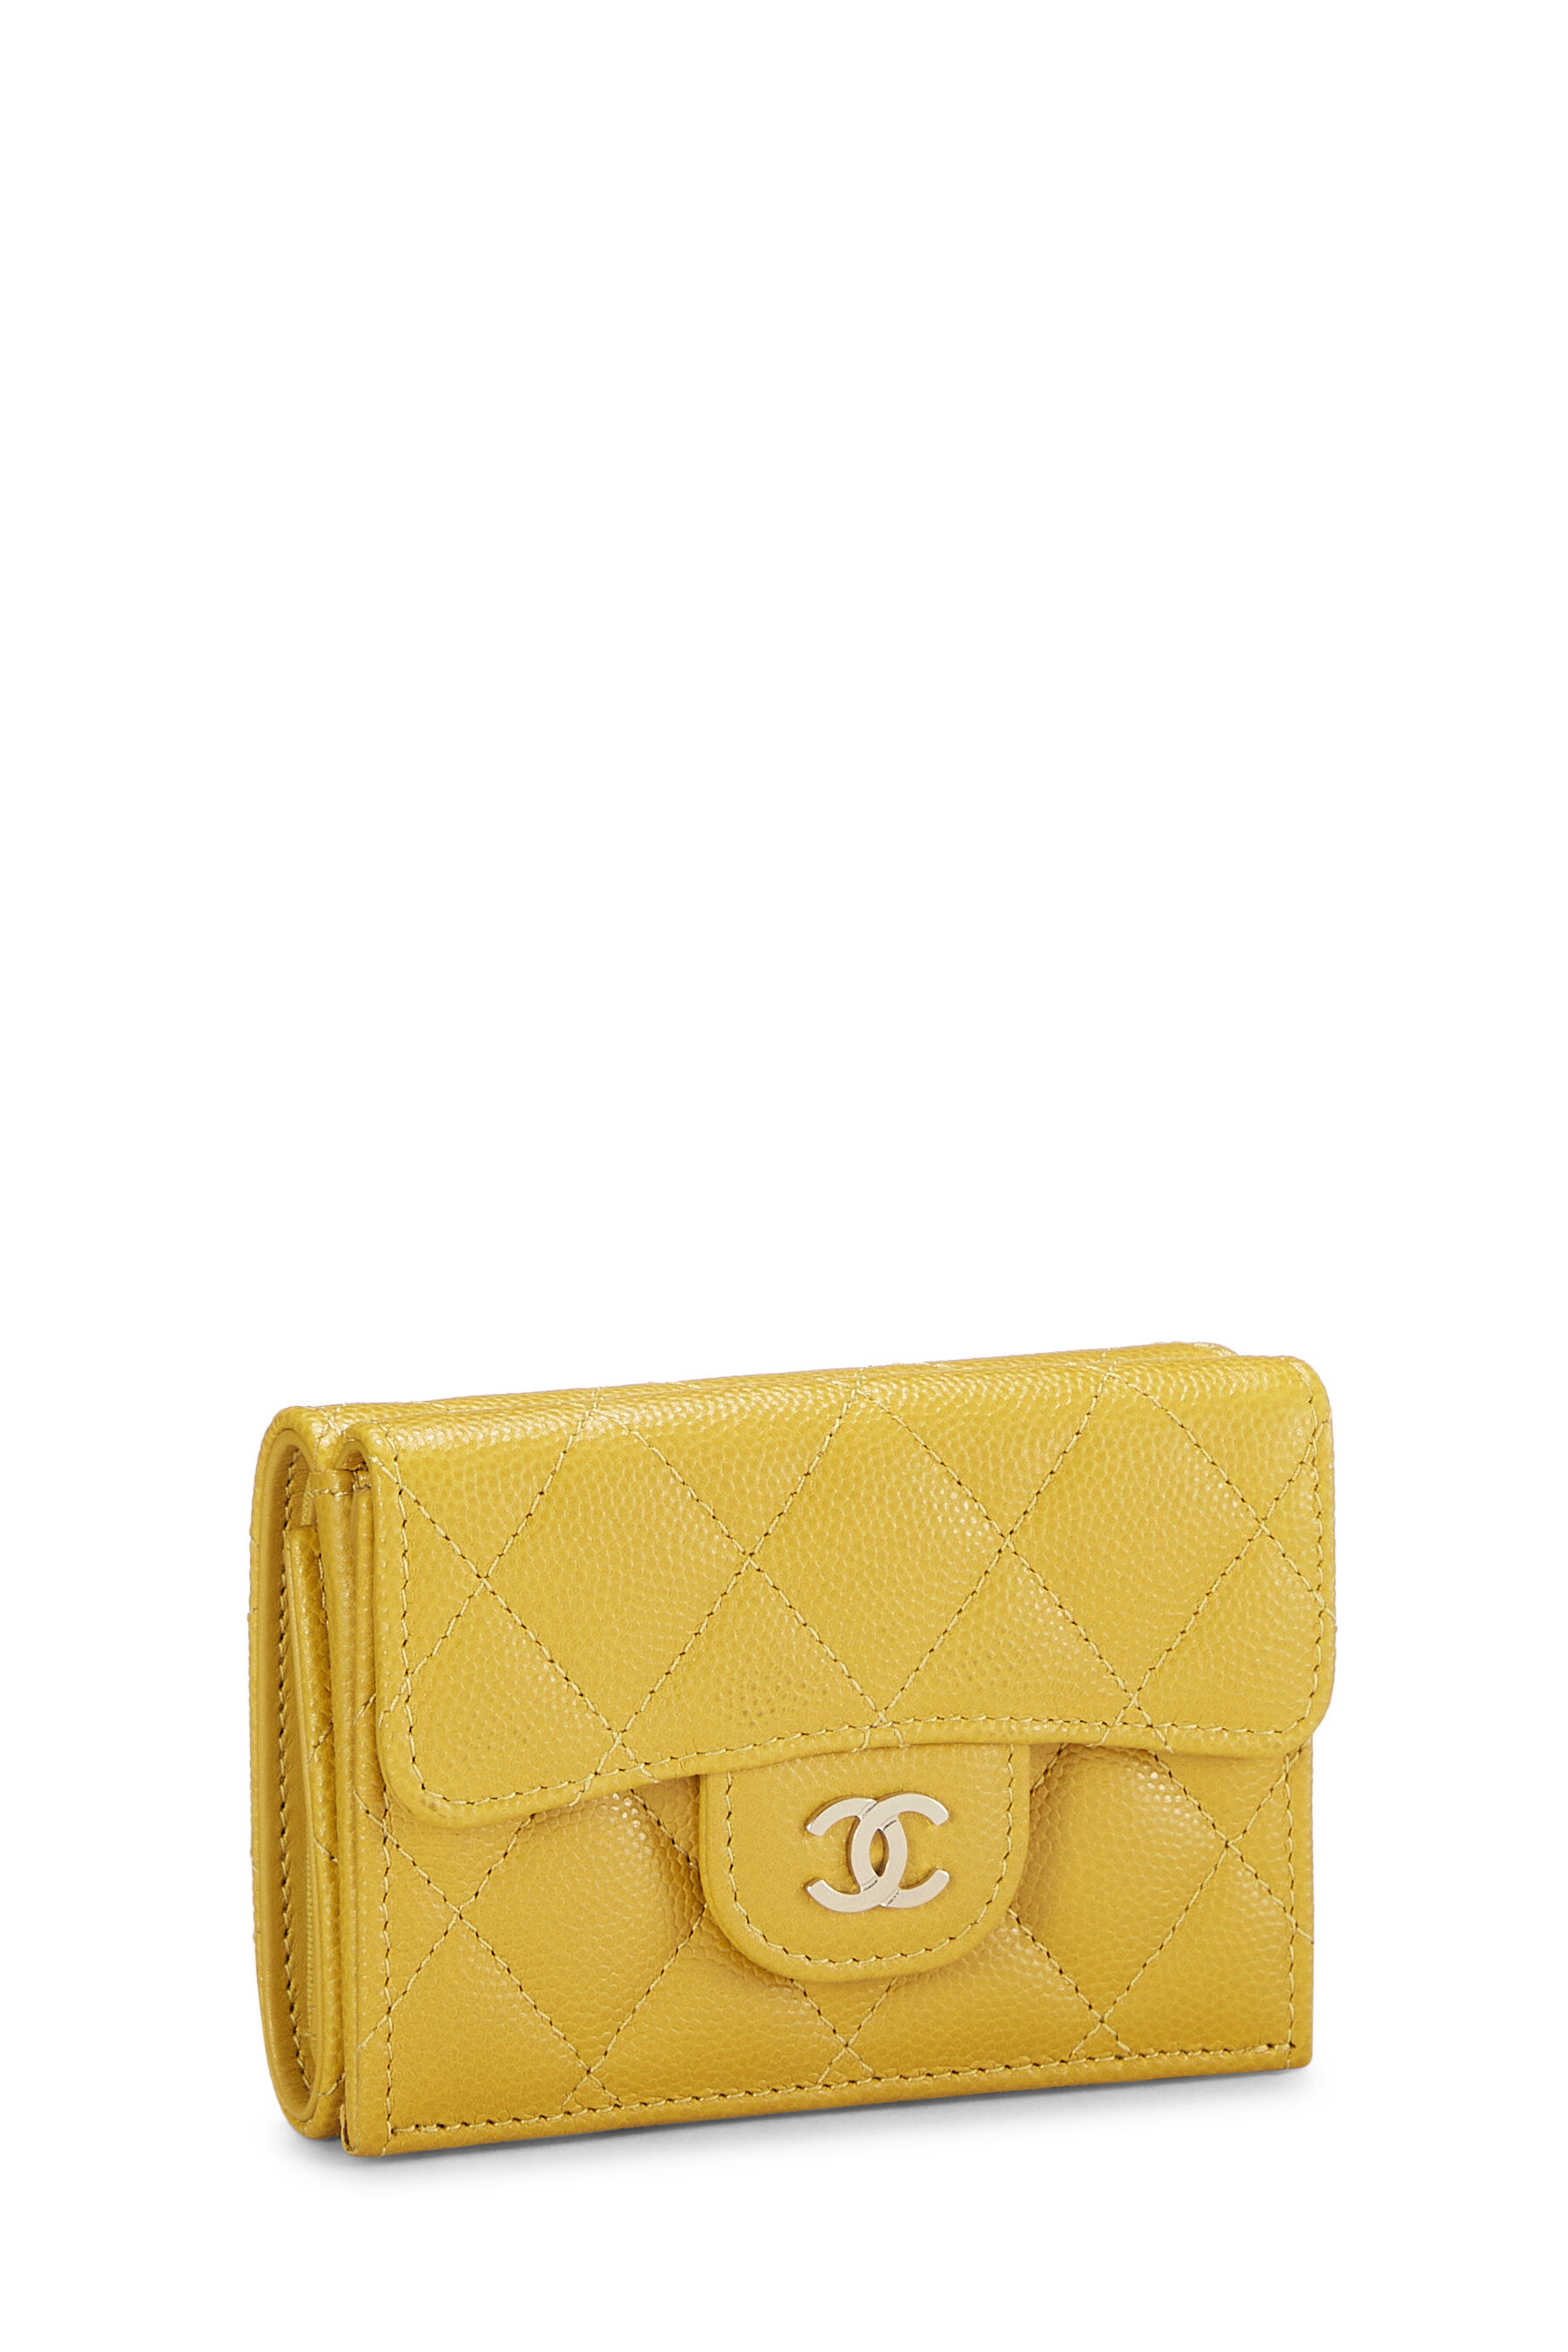 Chanel CC Compact Wallet